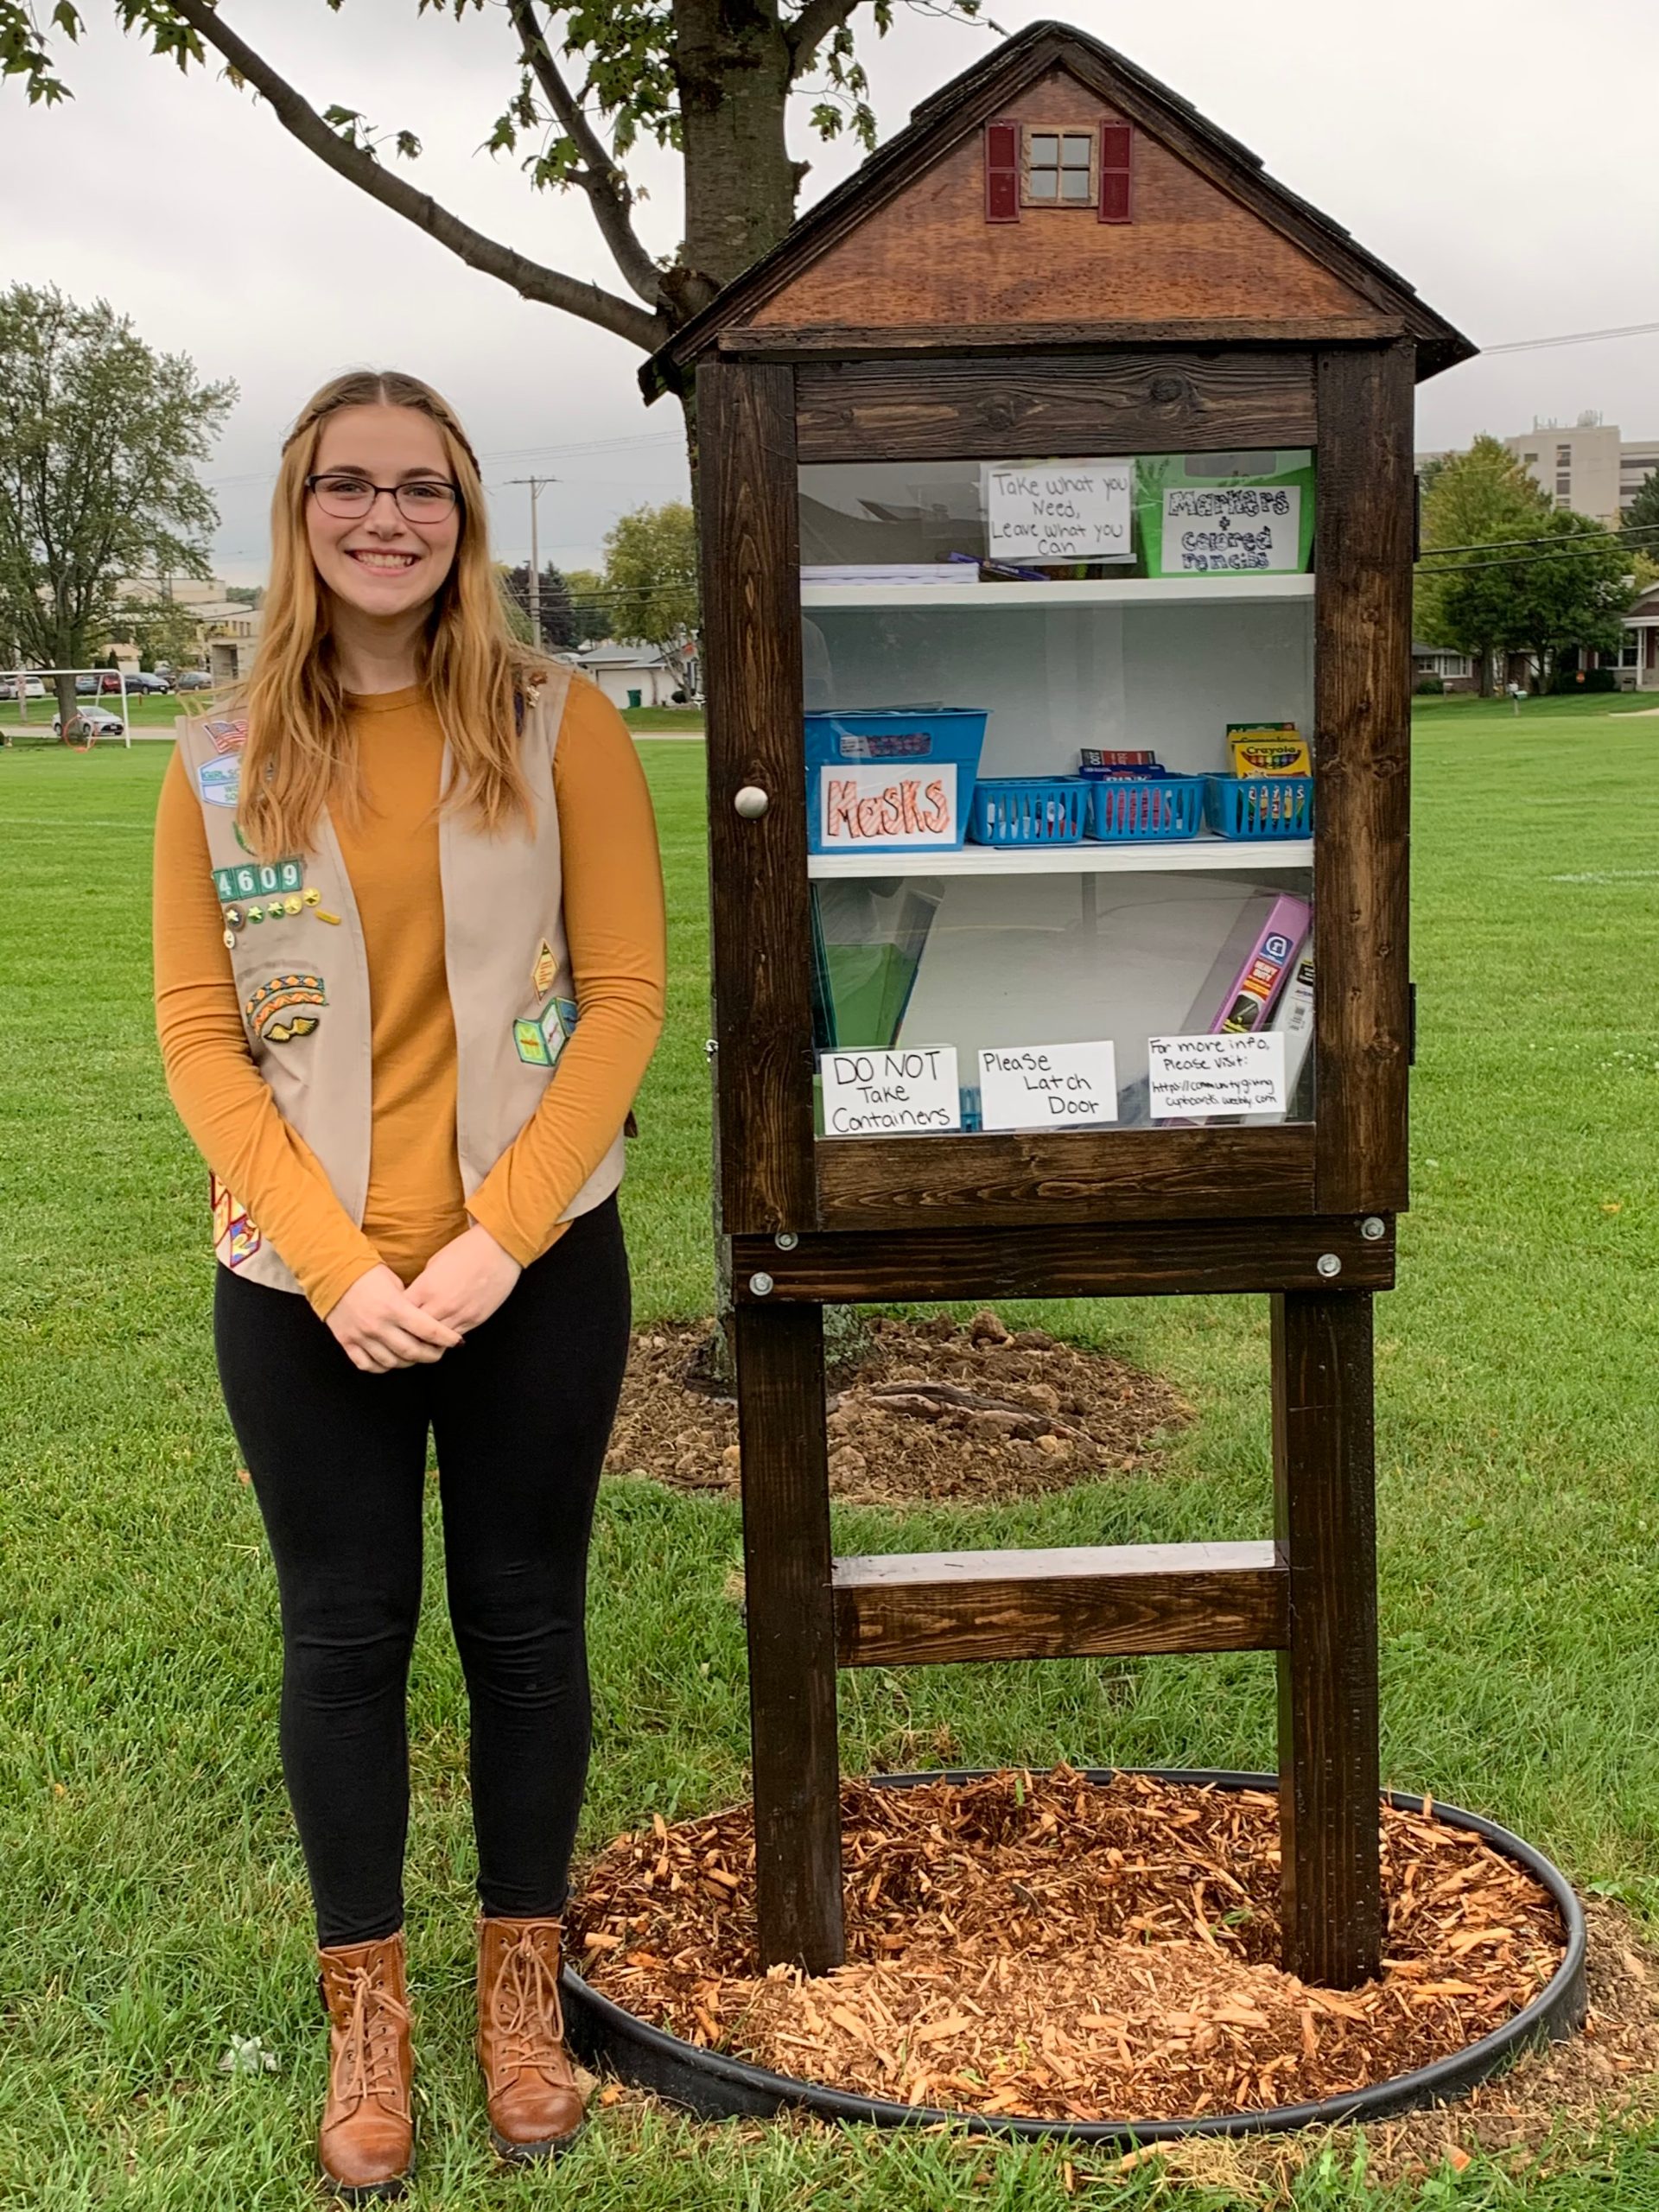 Gold Award Girl Scout standing proudly next to community cupboards she built